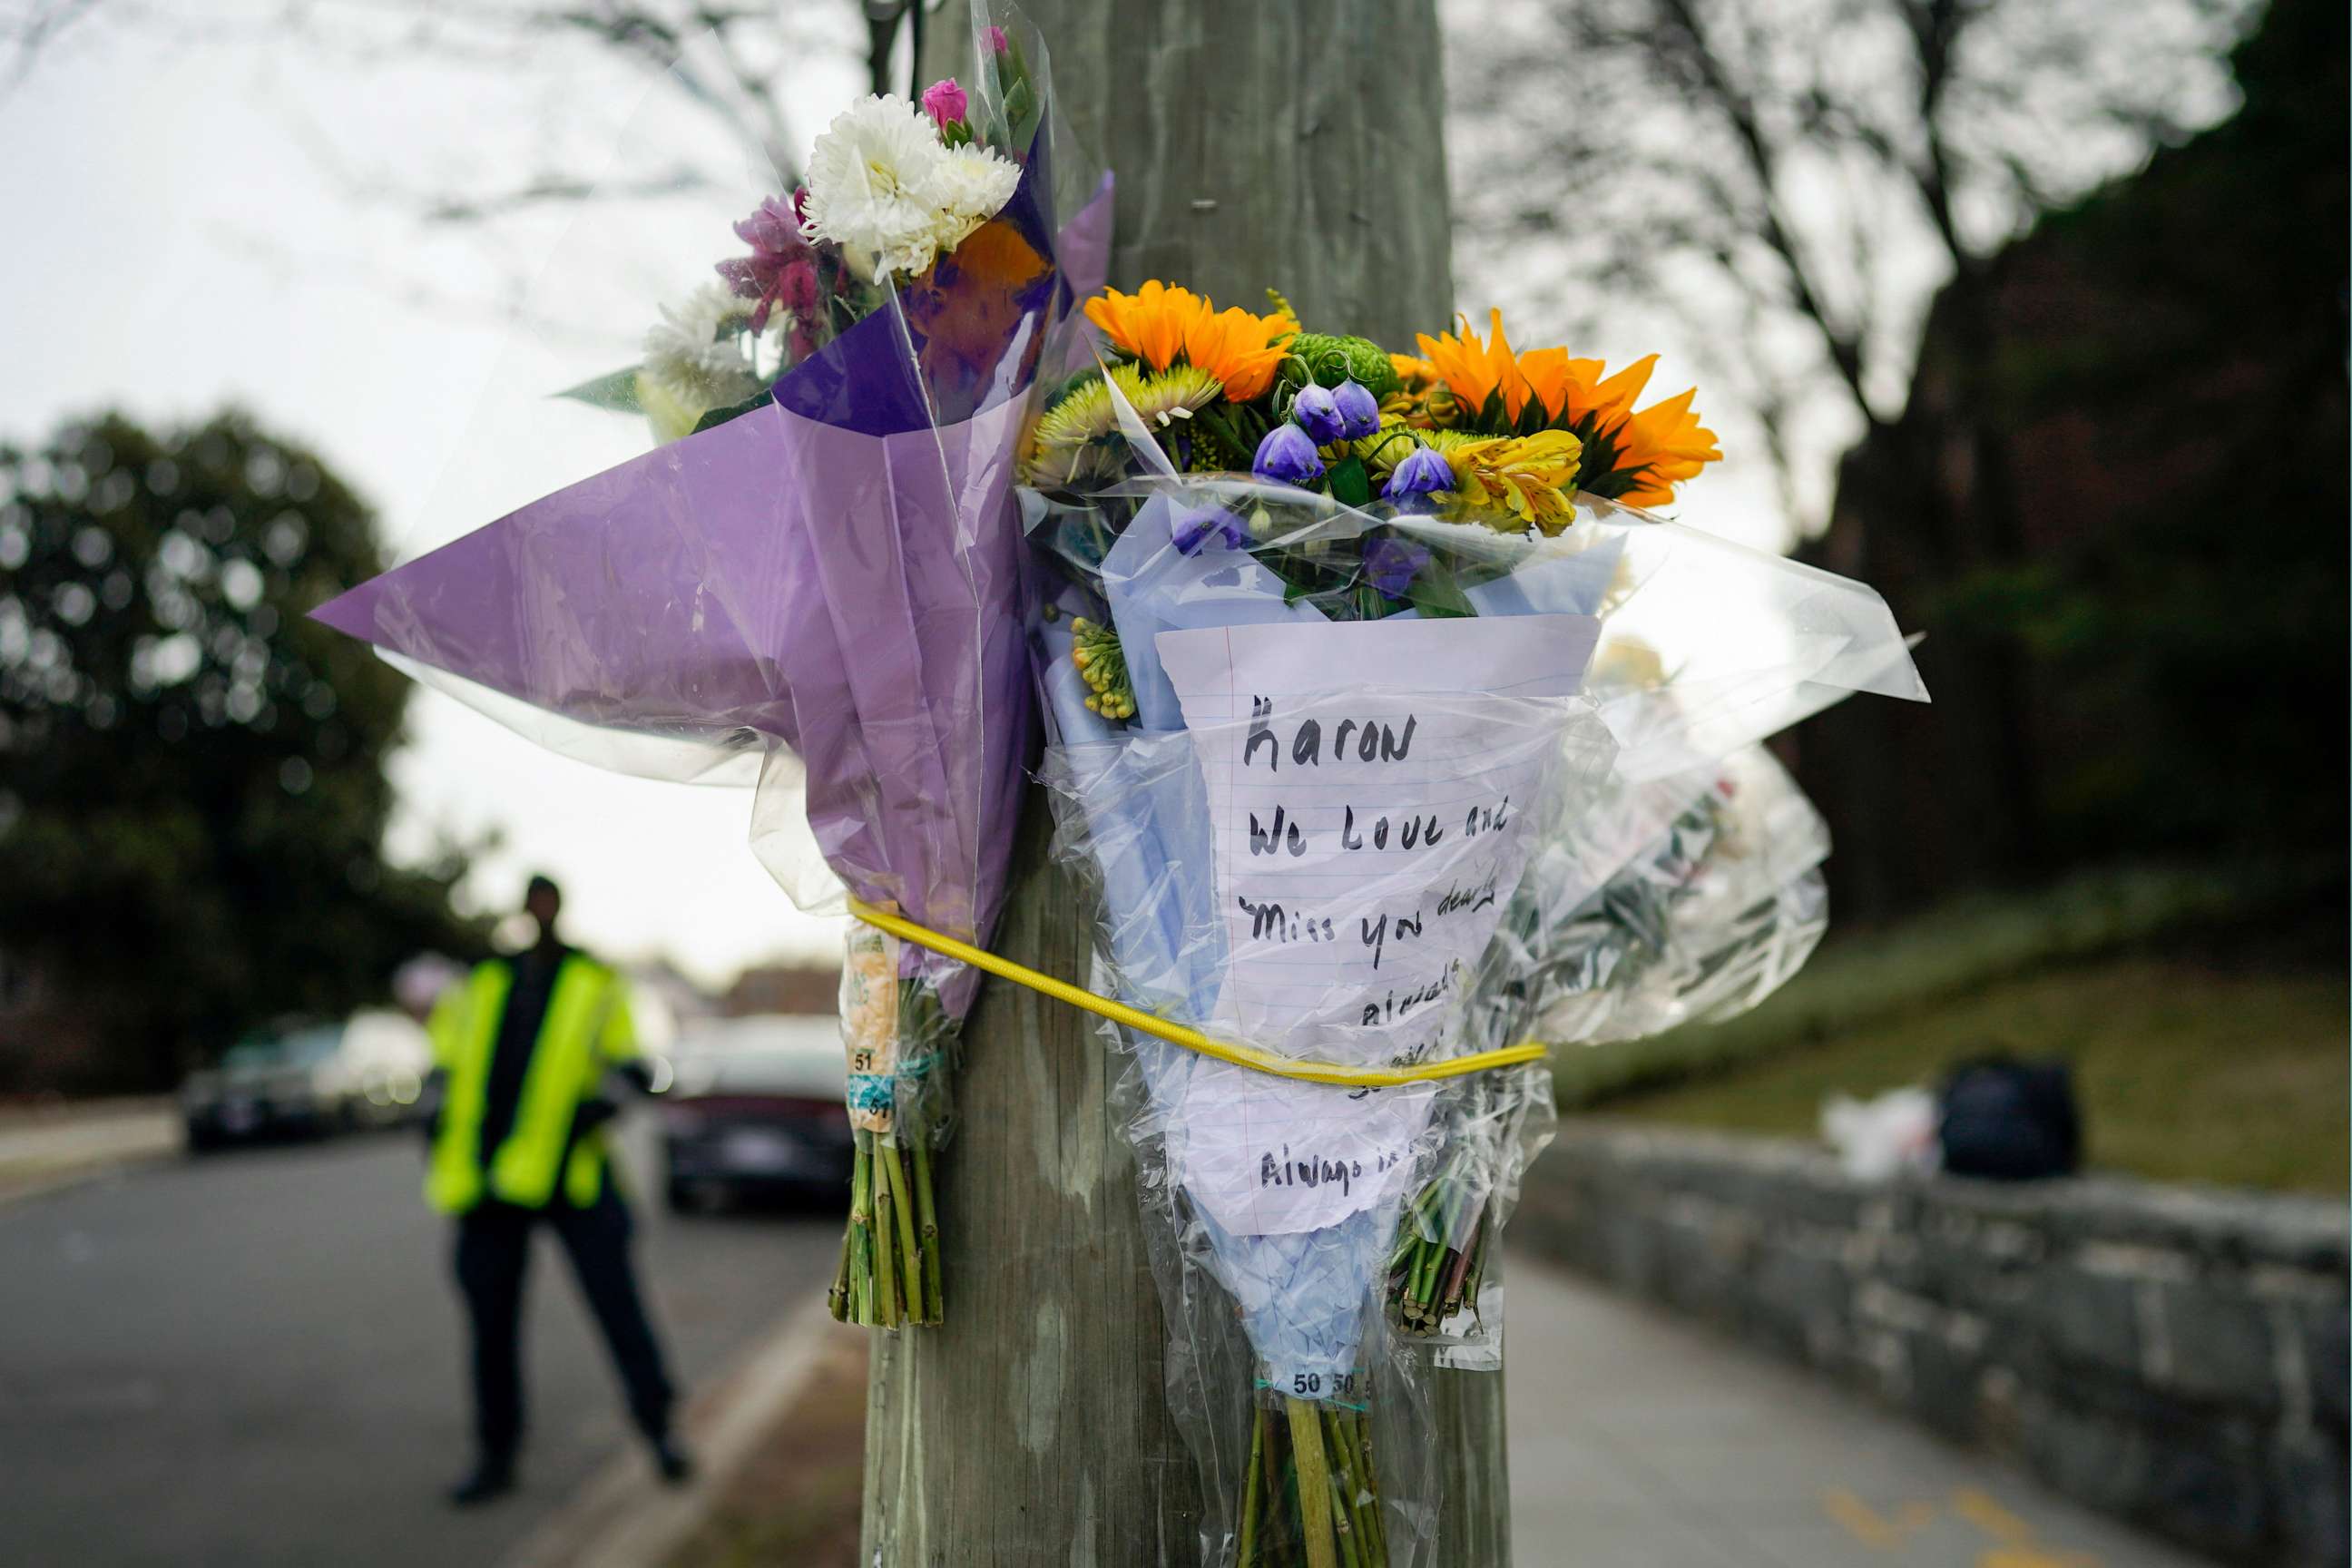 PHOTO: Flowers are secured to a pole as a memorial to Karon Blake, 13, on the corner of Quincy Street NE and Michigan Avenue NE in the Brookland neighborhood of Washington, Jan. 10, 2023. The note reads, "Karon we will love and miss you dearly."